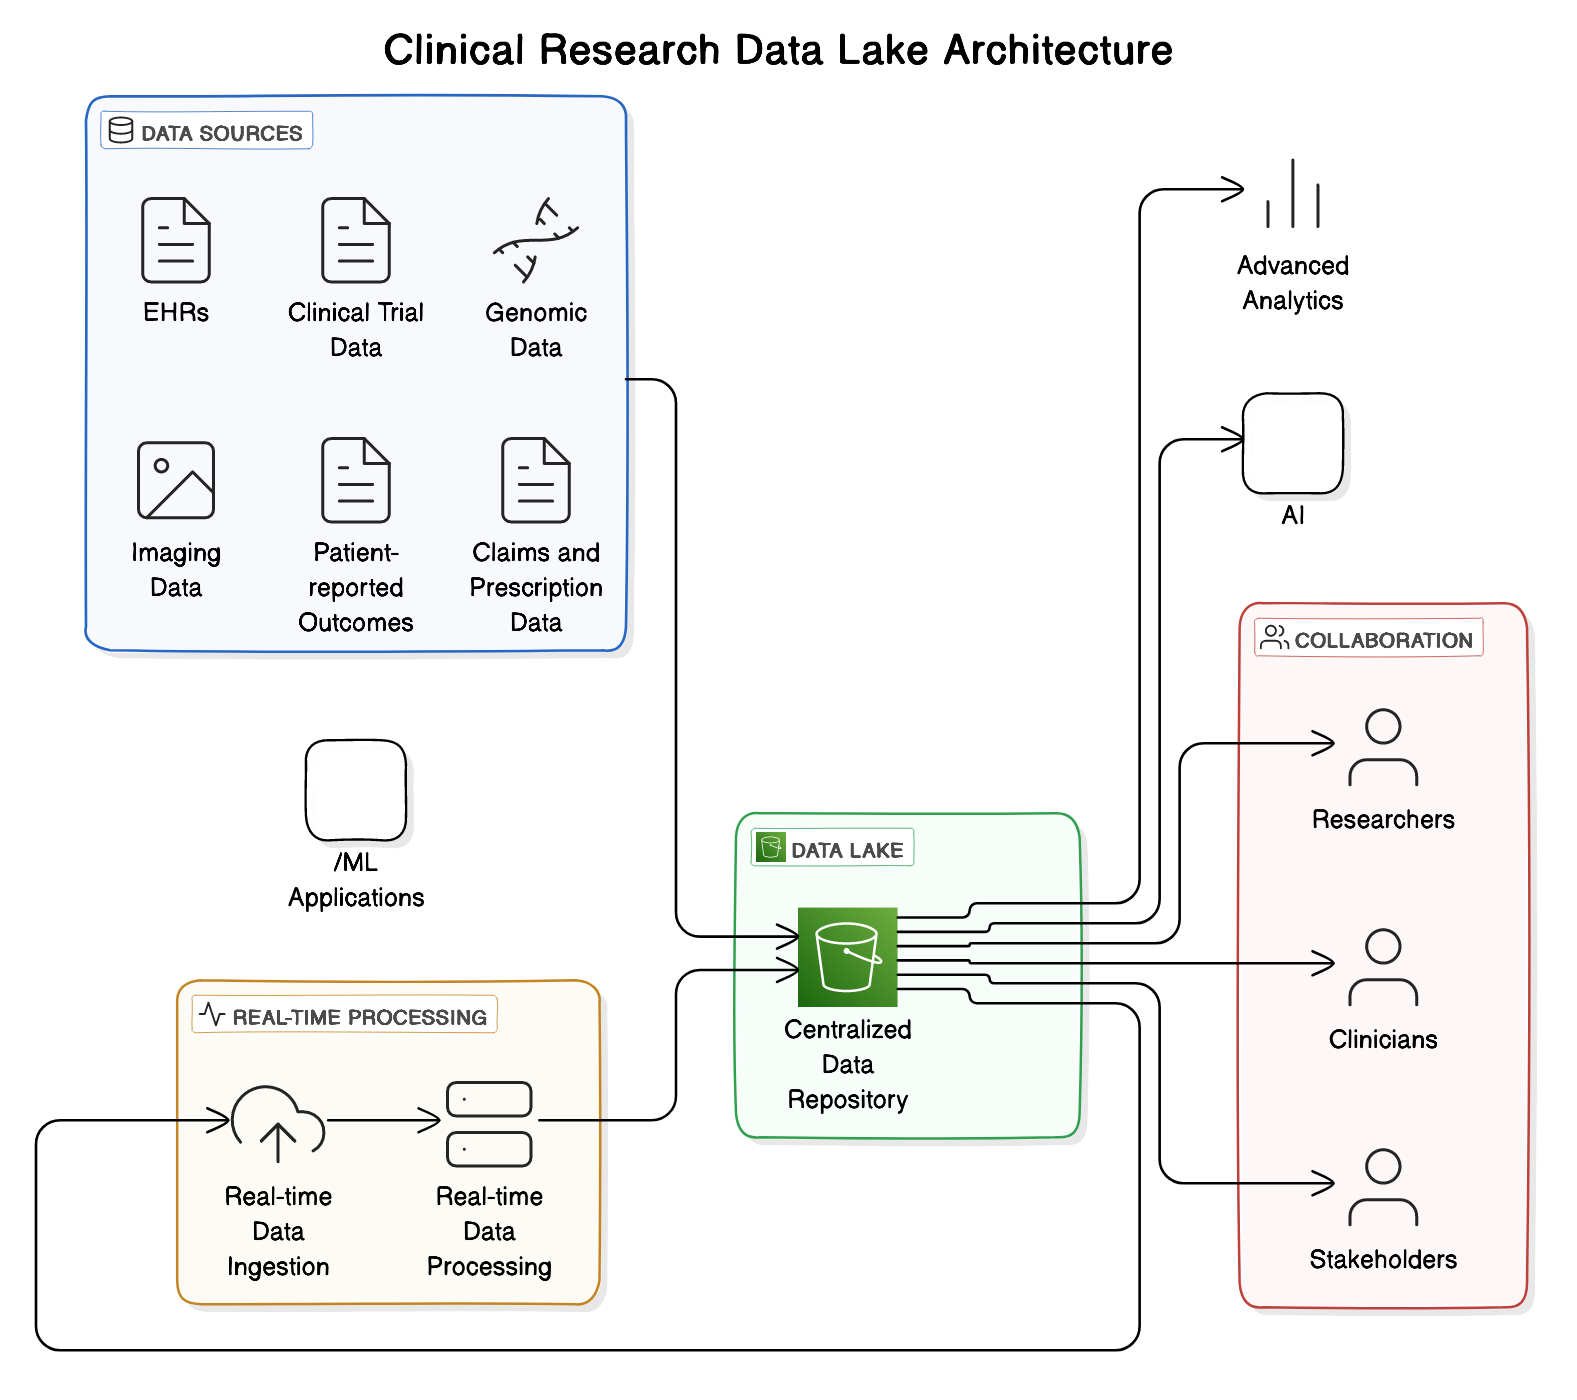 The Role of Data Lakes in Enabling Seamless Clinical Research Workflows